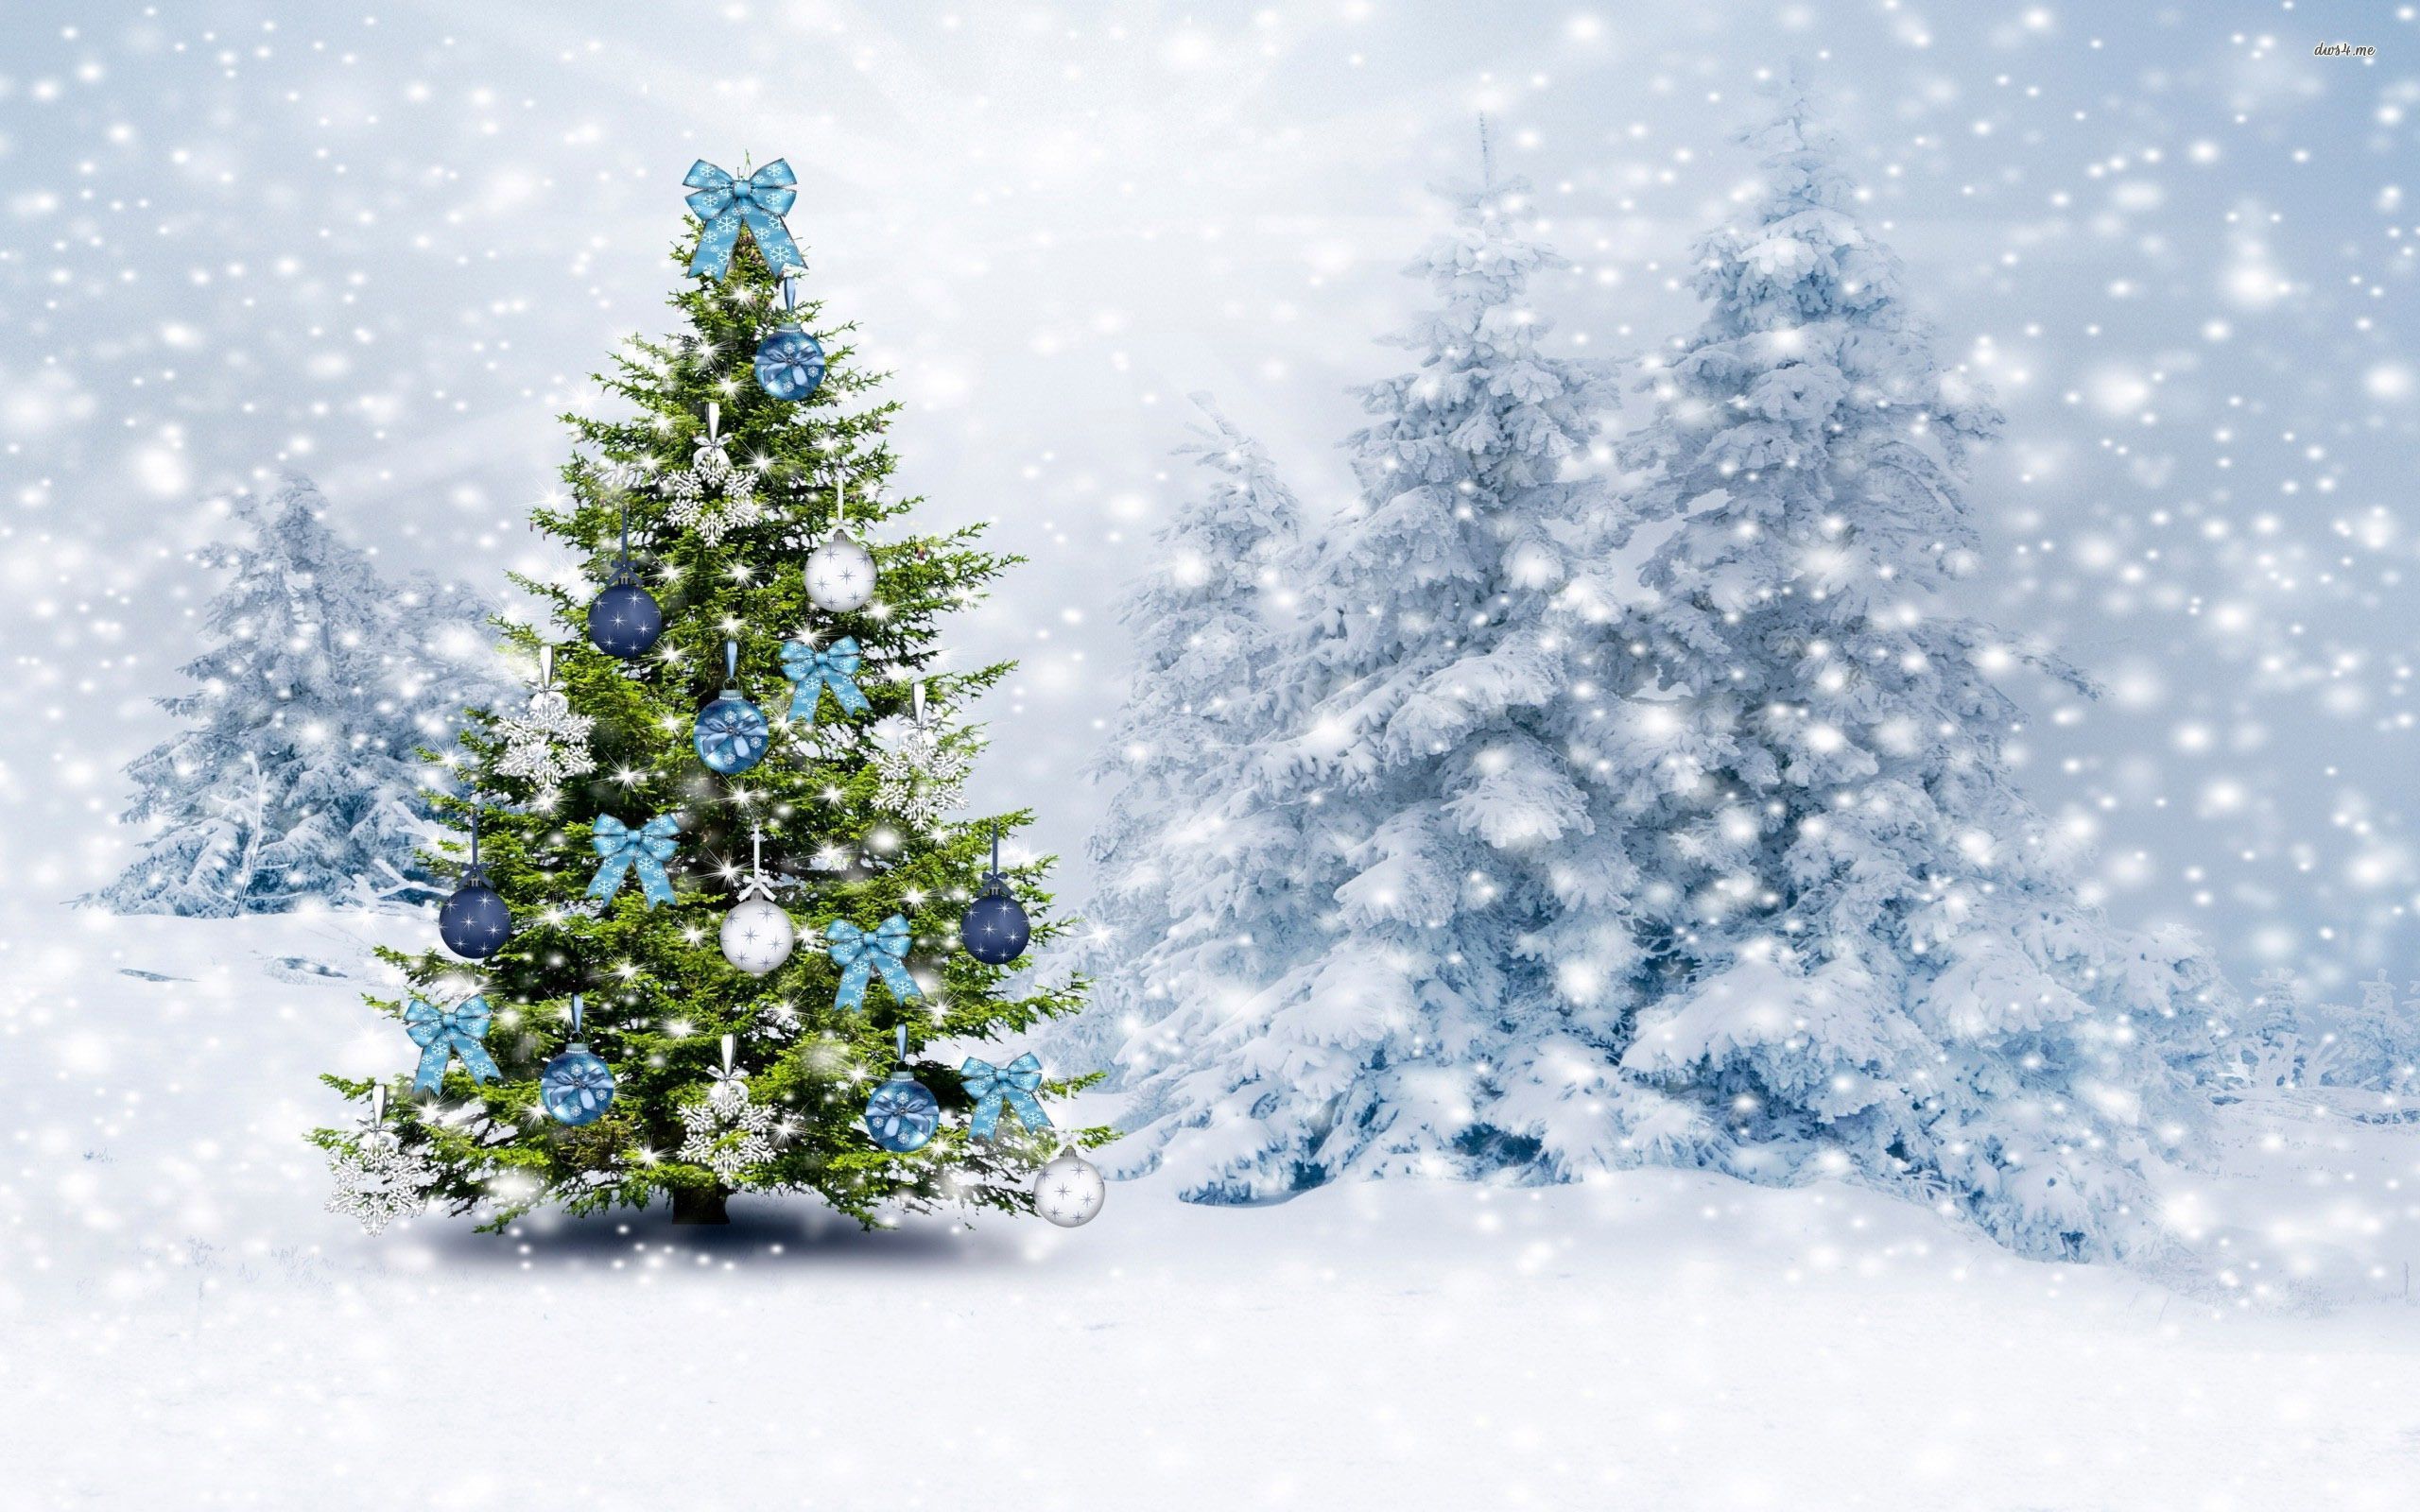 Christmas tree in the snowy forest HD wallpaper. Christmas tree wallpaper, Christmas tree background, Christmas tree photography